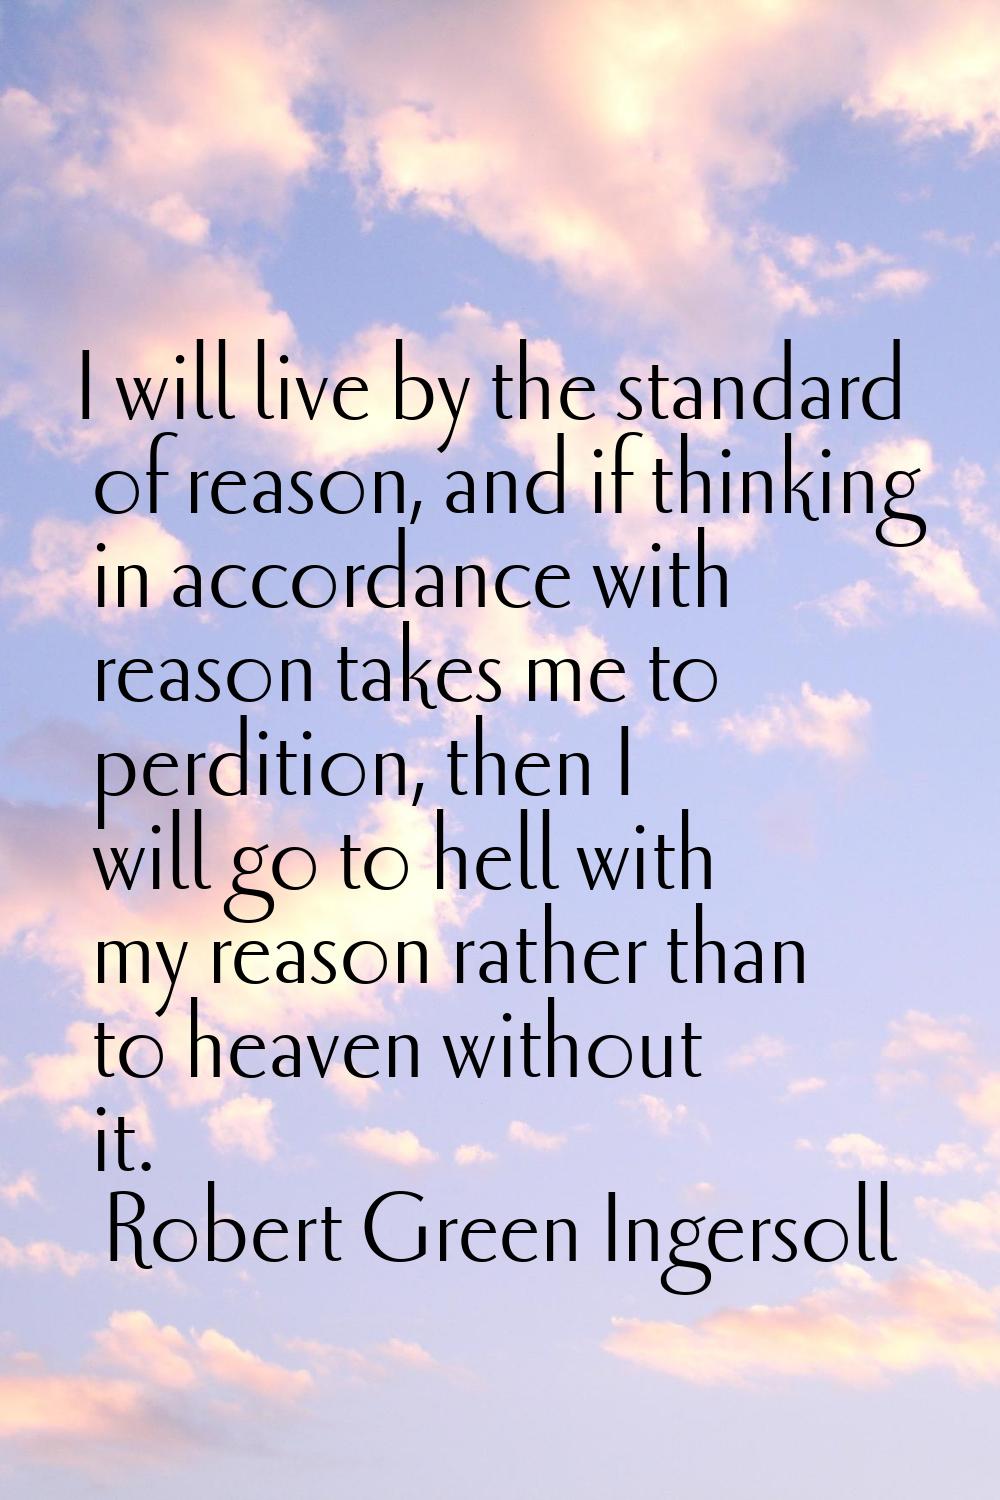 I will live by the standard of reason, and if thinking in accordance with reason takes me to perdit